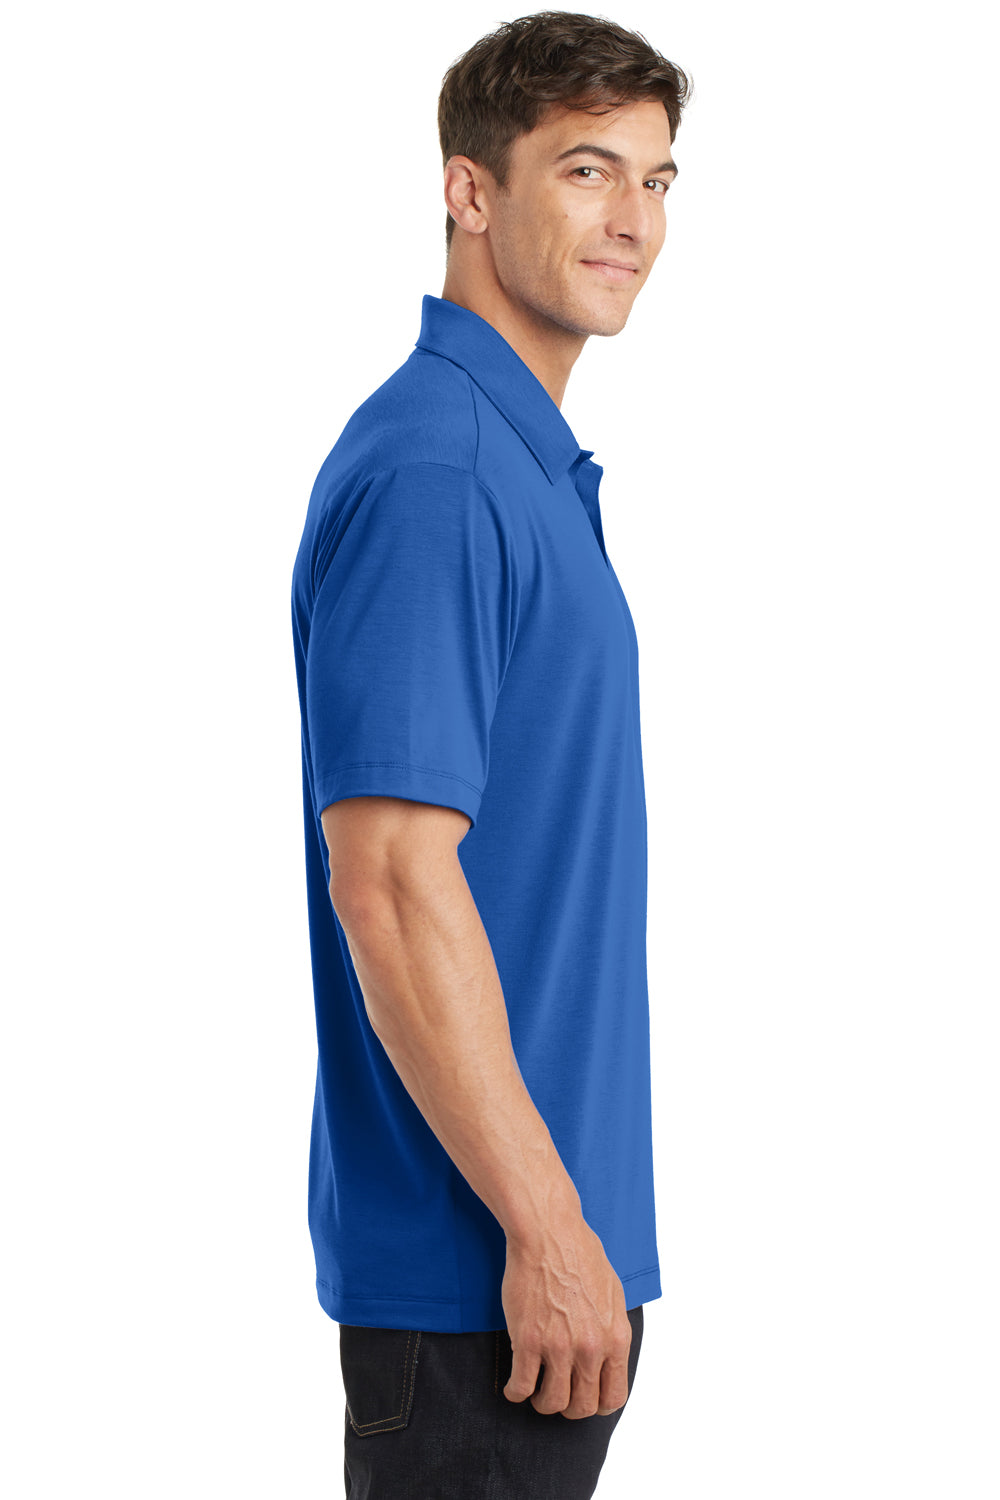 Port Authority K568 Mens Cotton Touch Performance Moisture Wicking Short Sleeve Polo Shirt Strong Blue Side